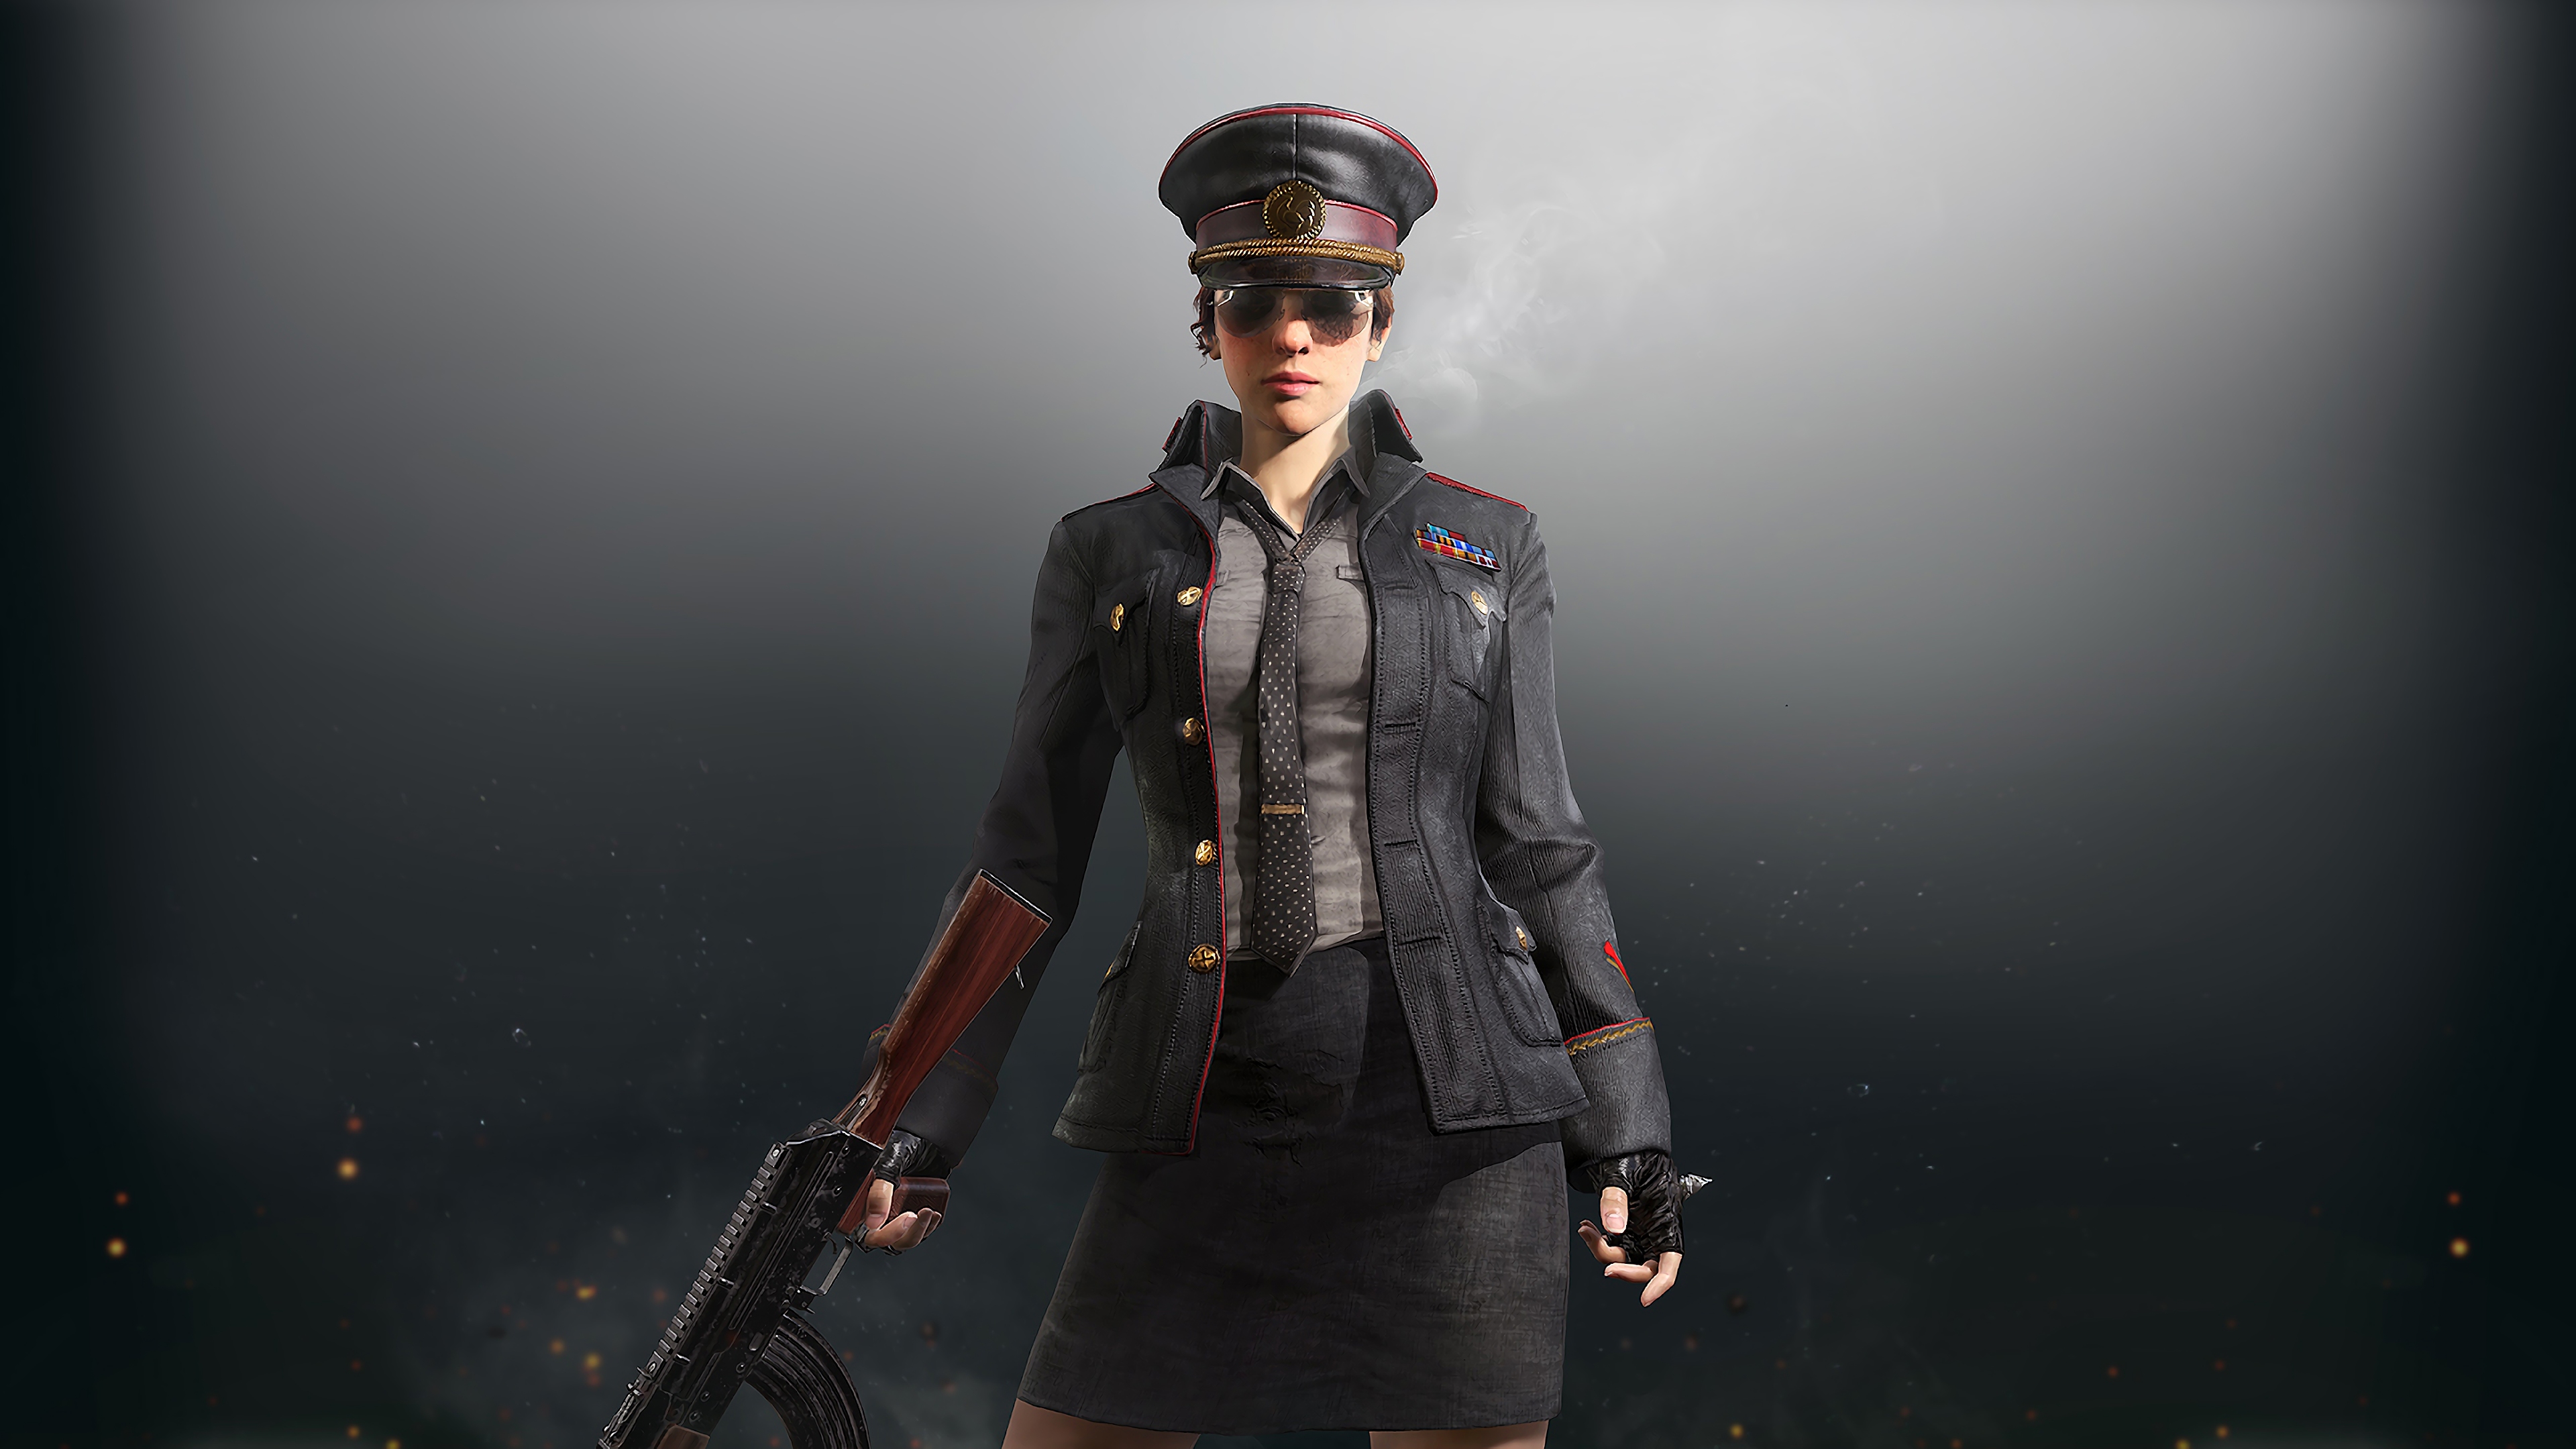  Pubg  Police Girl  HD  Games 4k  Wallpapers  Images 